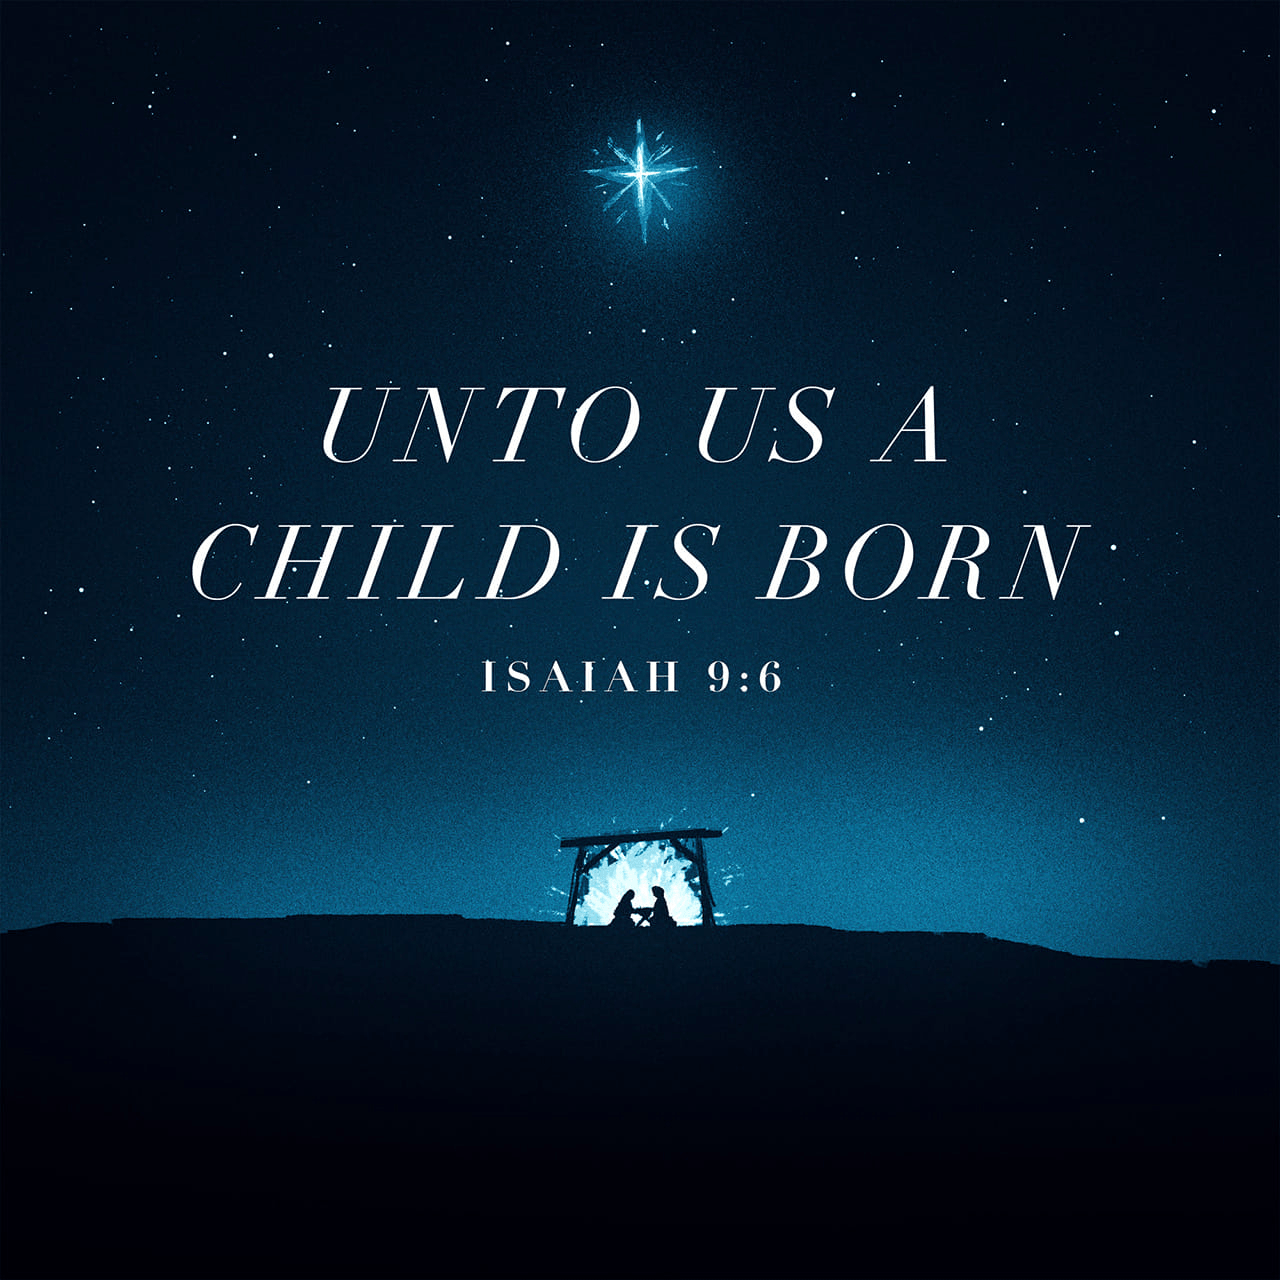 VOTD December 25 - “For a child will be born to us, a son will be given to us; And the government will rest on His shoulders; And His name will be called Wonderful Counselor, Mighty God, Eternal Father, Prince of Peace.” Isaiah 9:6 NASB